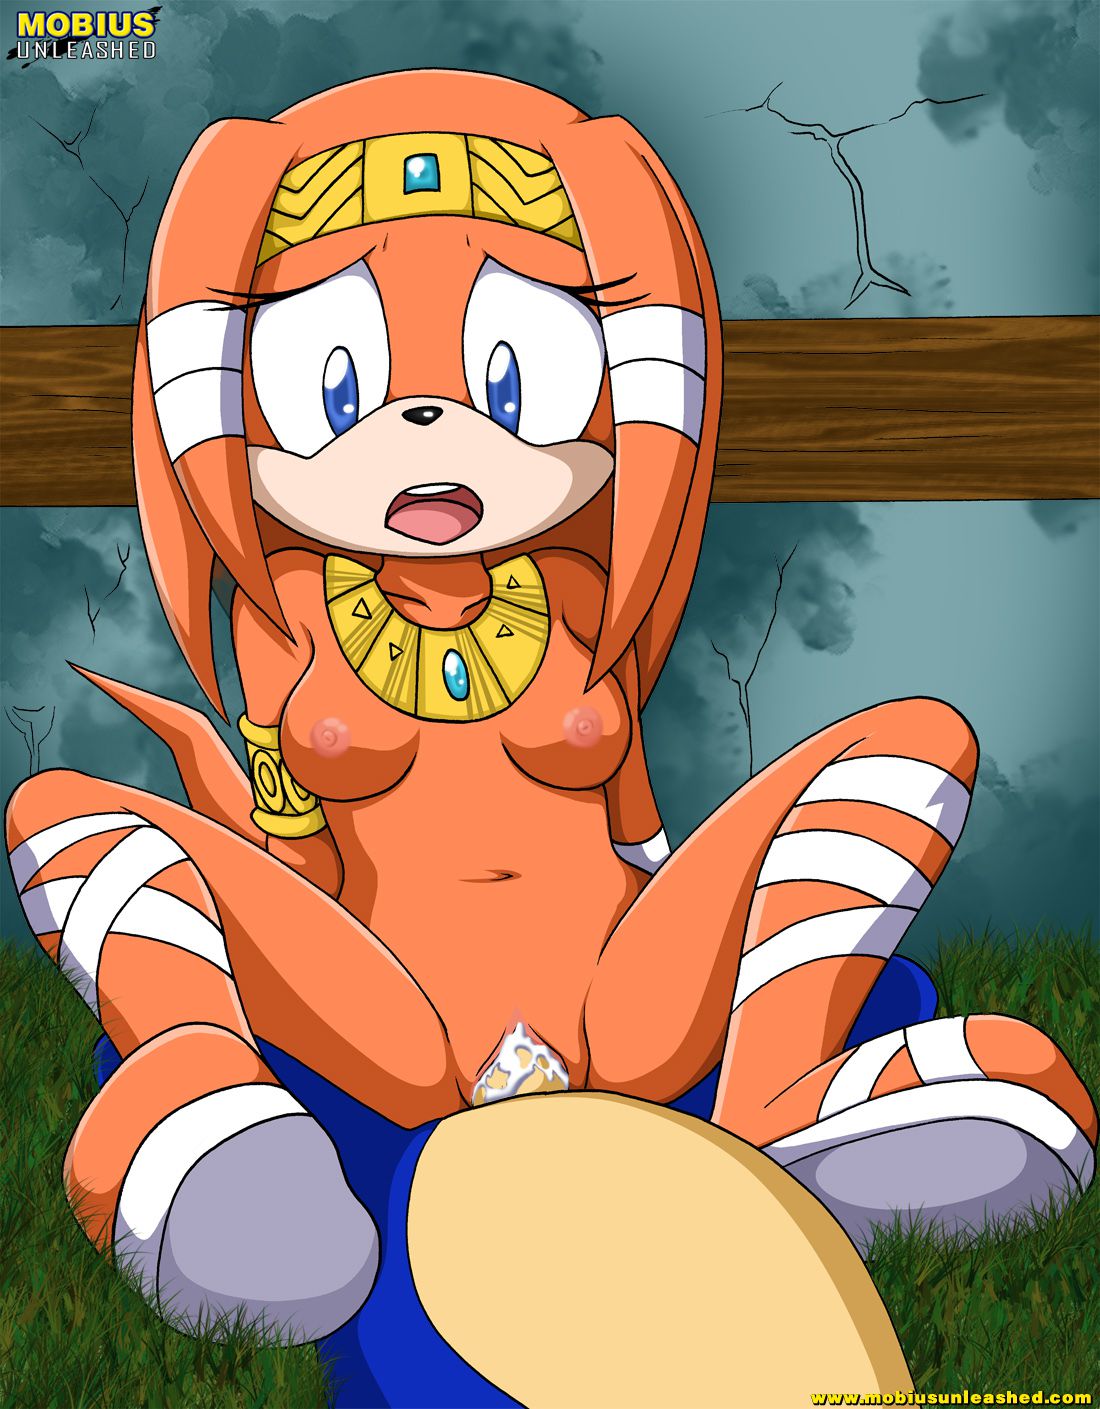 Mobius Unleashed: Tikal the Echidna 68